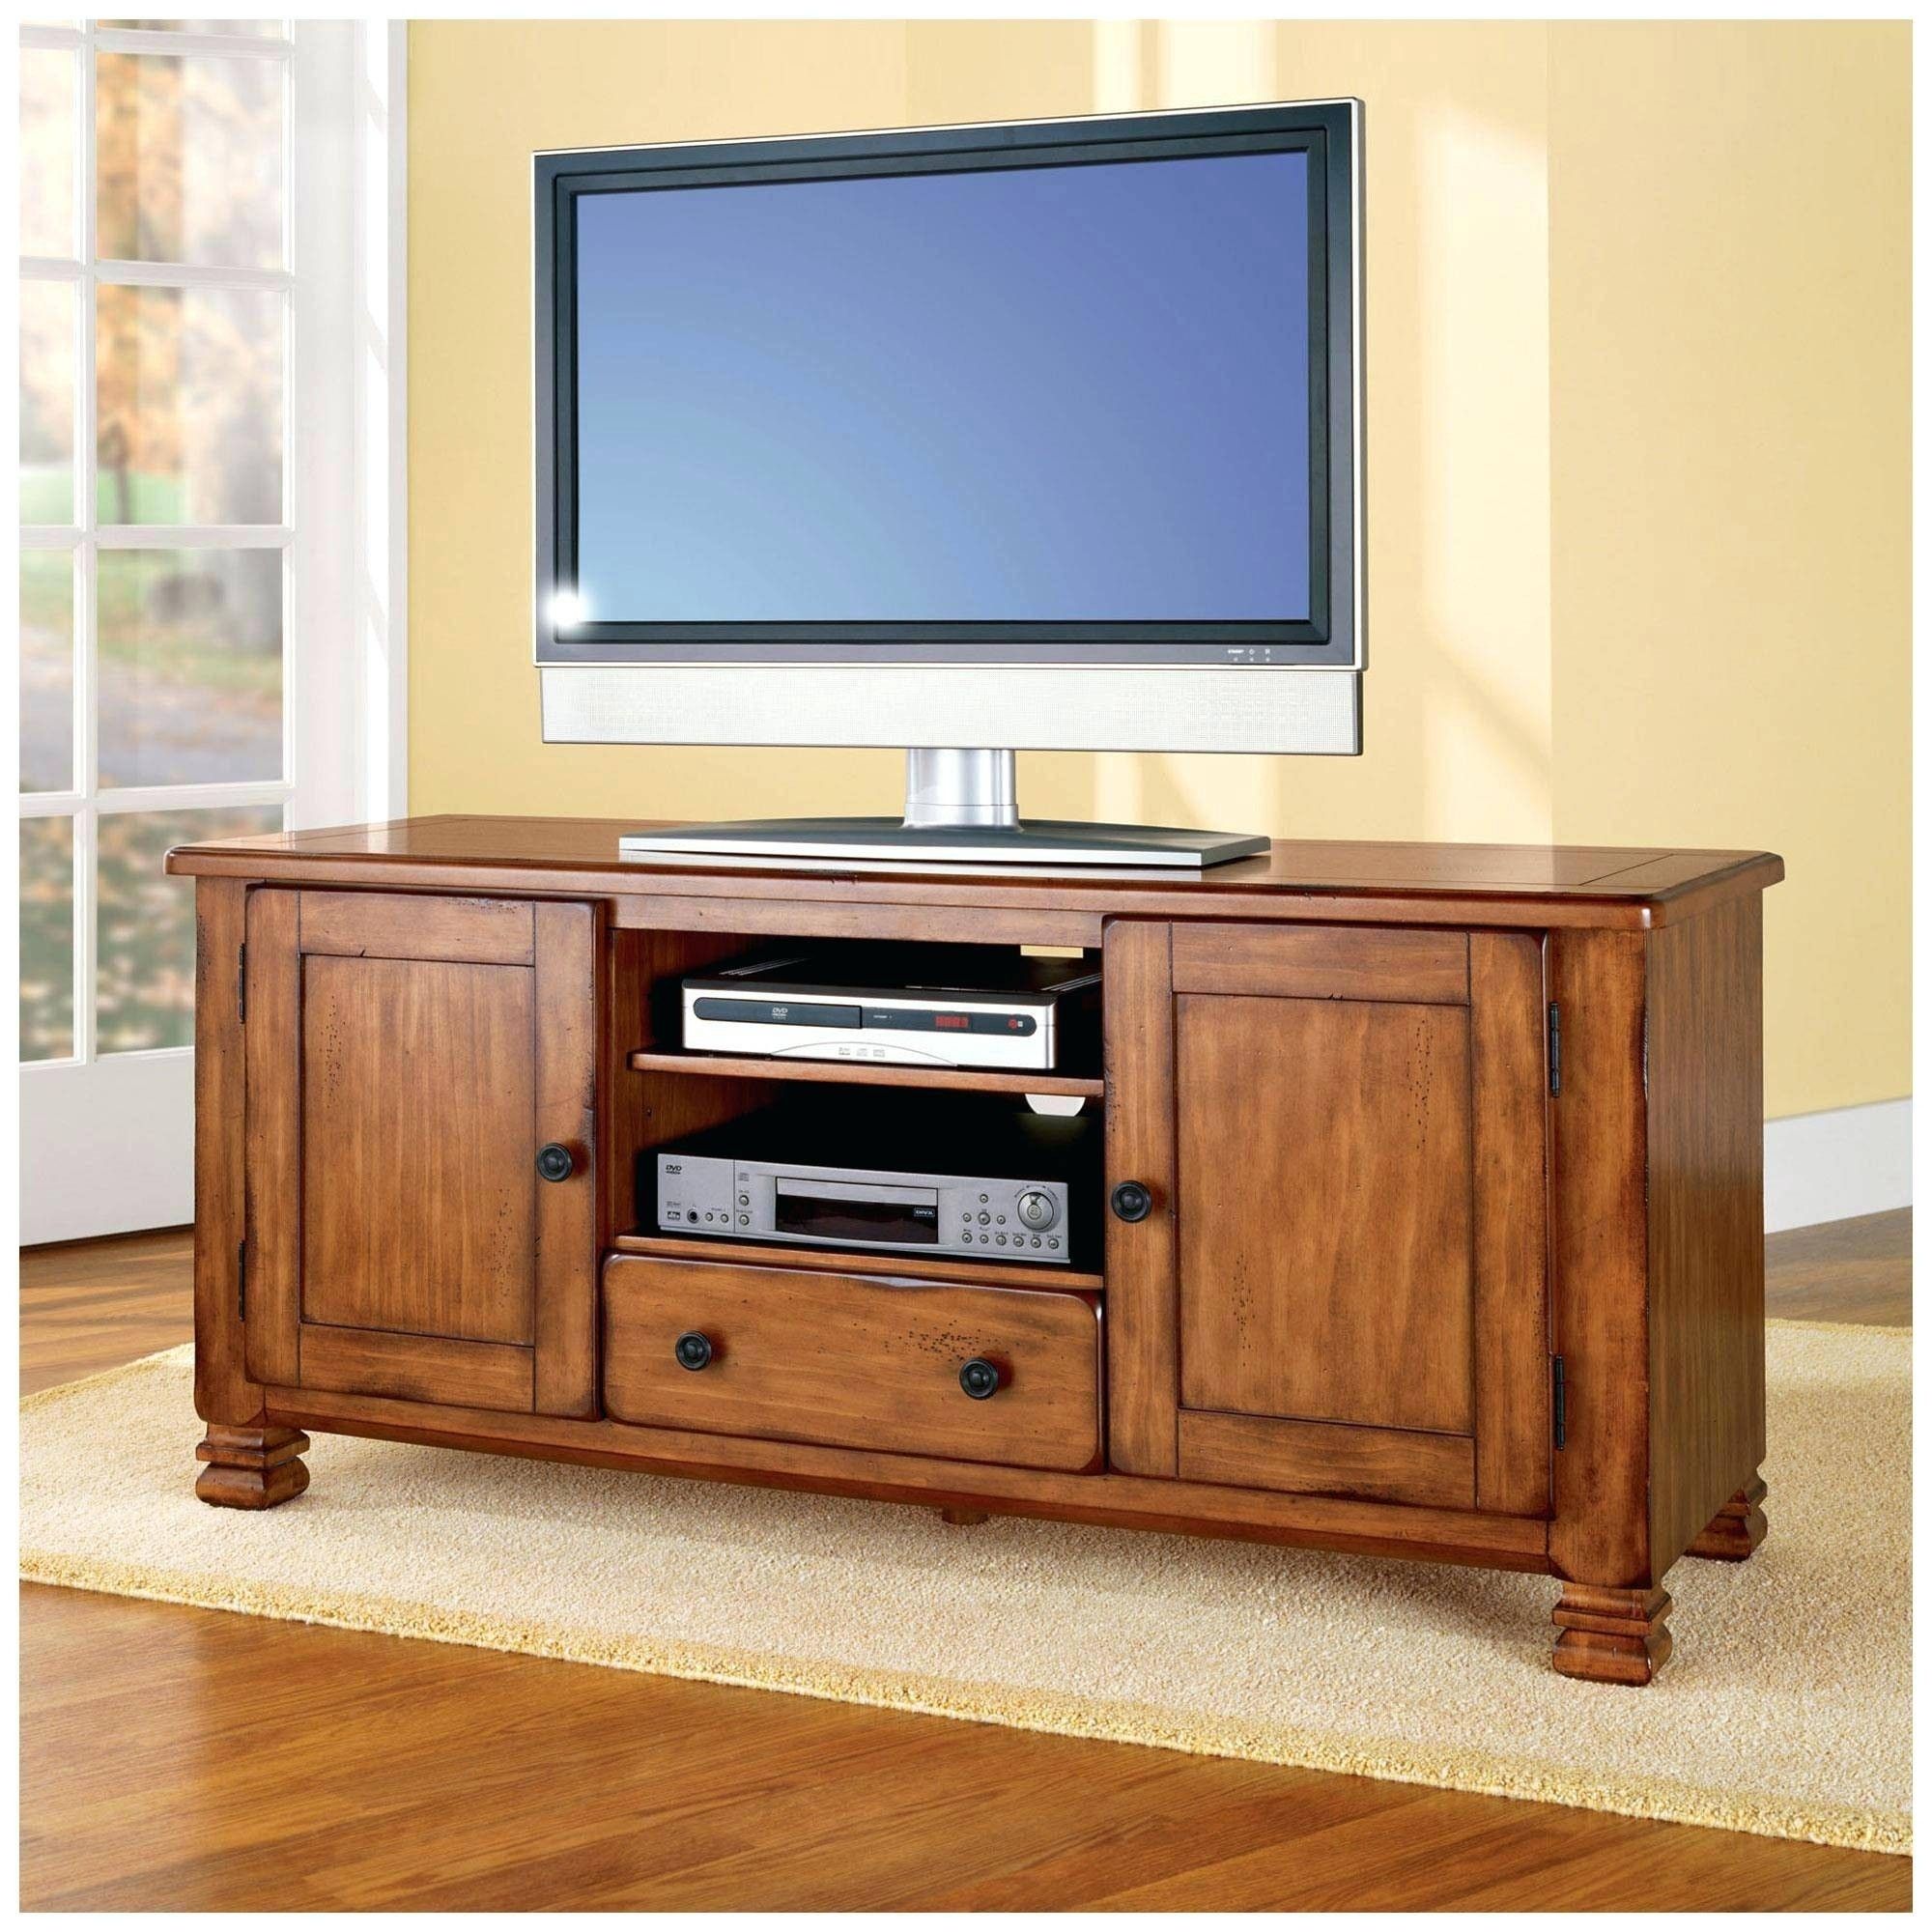 Oak Corner Tv Stands For Flat Screens – Ideas On Foter Intended For Oak Tv Stands For Flat Screen (View 5 of 15)